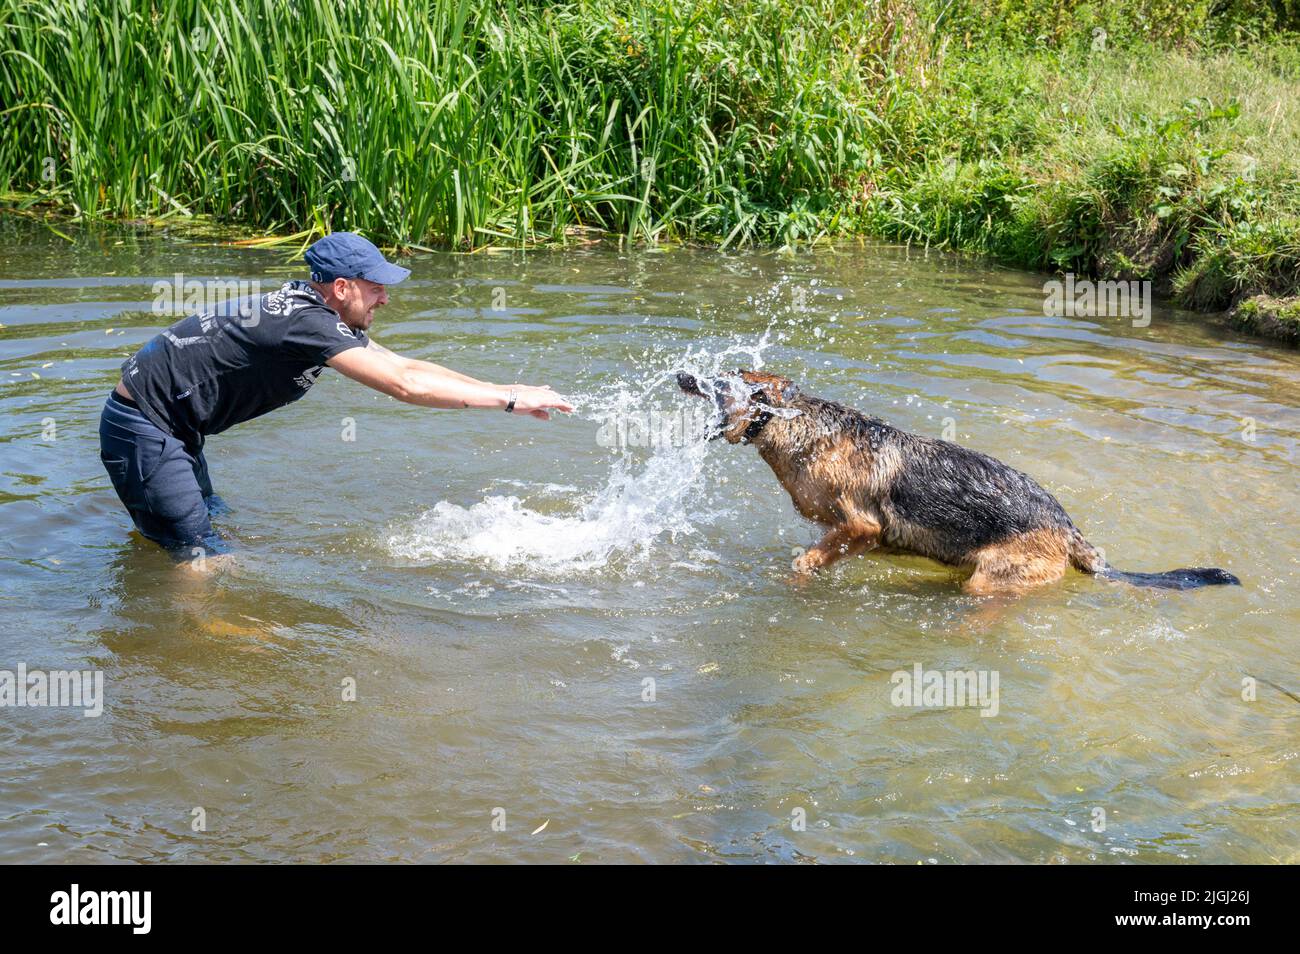 Overcote, Over, Cambridgeshire UK, 11th July 2022. Peter and his German Shepherd dog Mia cool down in the River Great Ouse in the UK heatwave. Amber warnings for high temperatures have been issued in the east of England today as temperatures are forecast to be above 30 degrees centigrade. The UK weather is expected to be hot and sunny most of the week with the potential to break the record for the hottest day at the weekend. Credit: Julian Eales/Alamy Live News Stock Photo